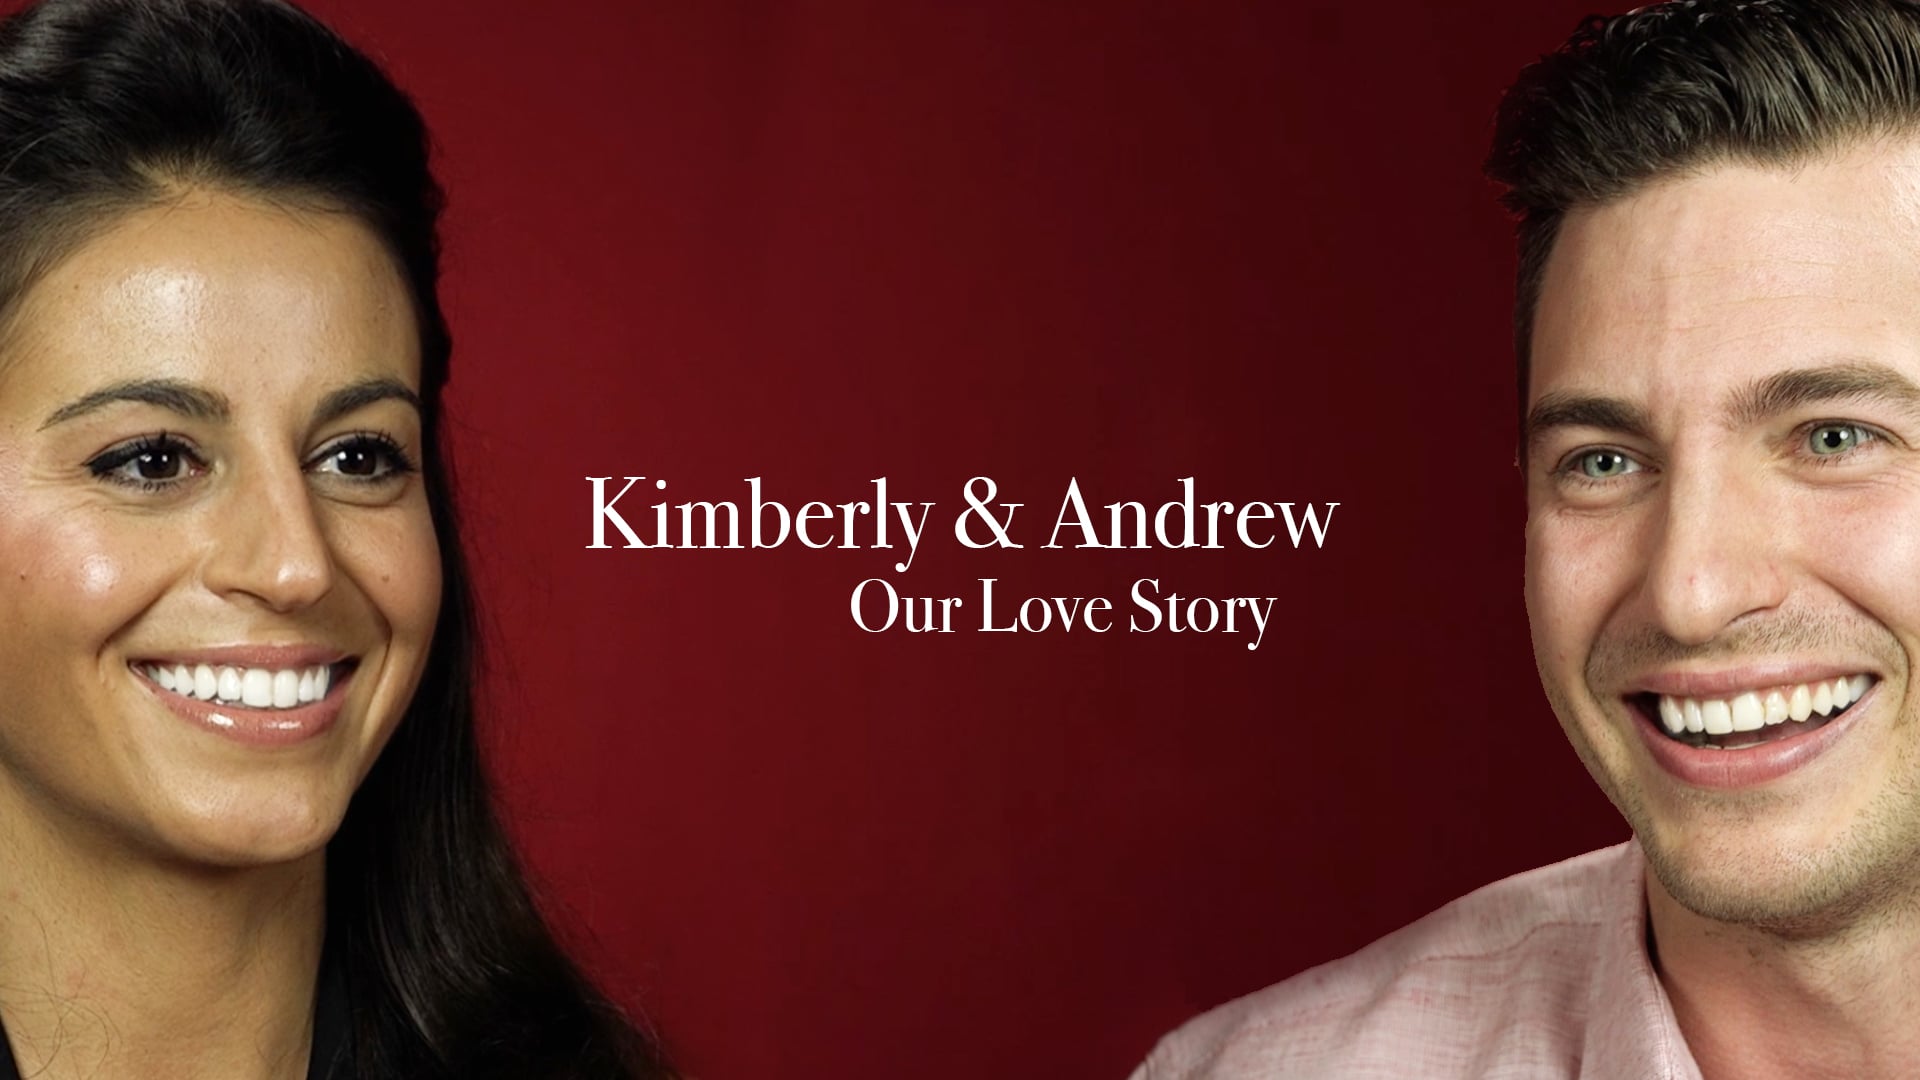 Our Love Story (Kimberly & Andrew)